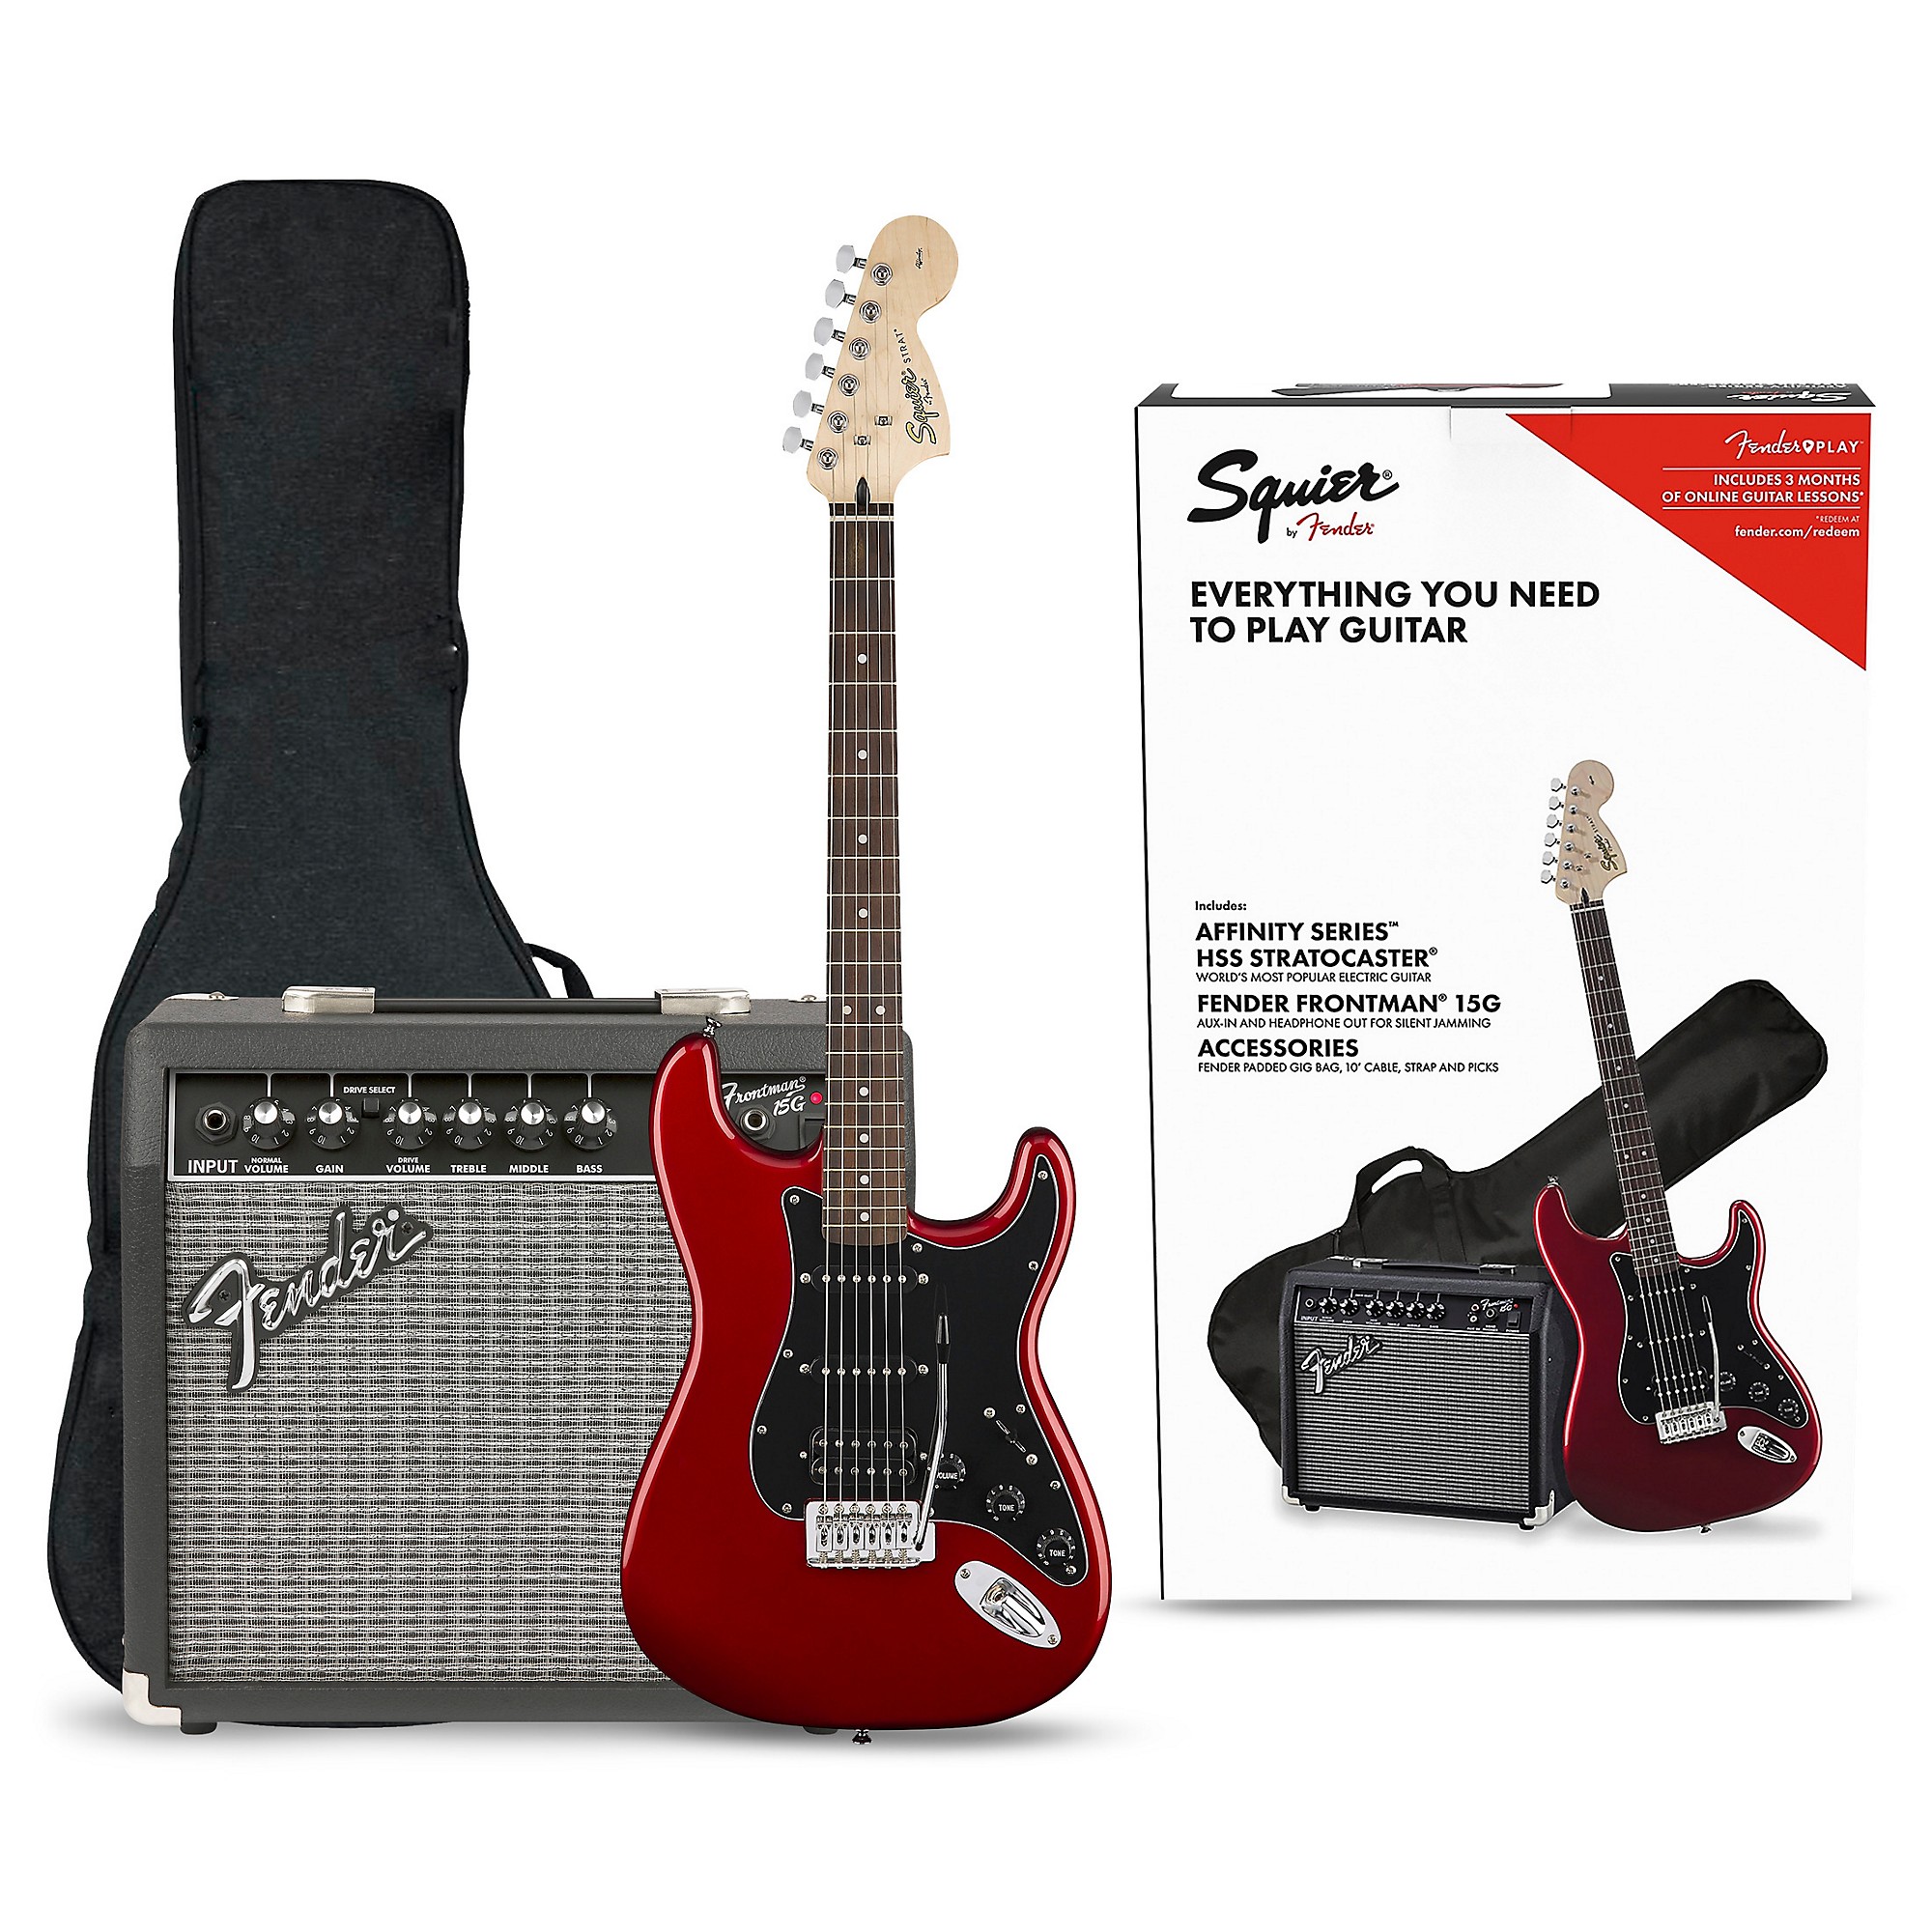 Squier stratocaster hss. Фендер Аффинити гитара электро. Fender Squire Affinity Series Stratocaster. Fender frontman 15g. Squier Affinity HSS.